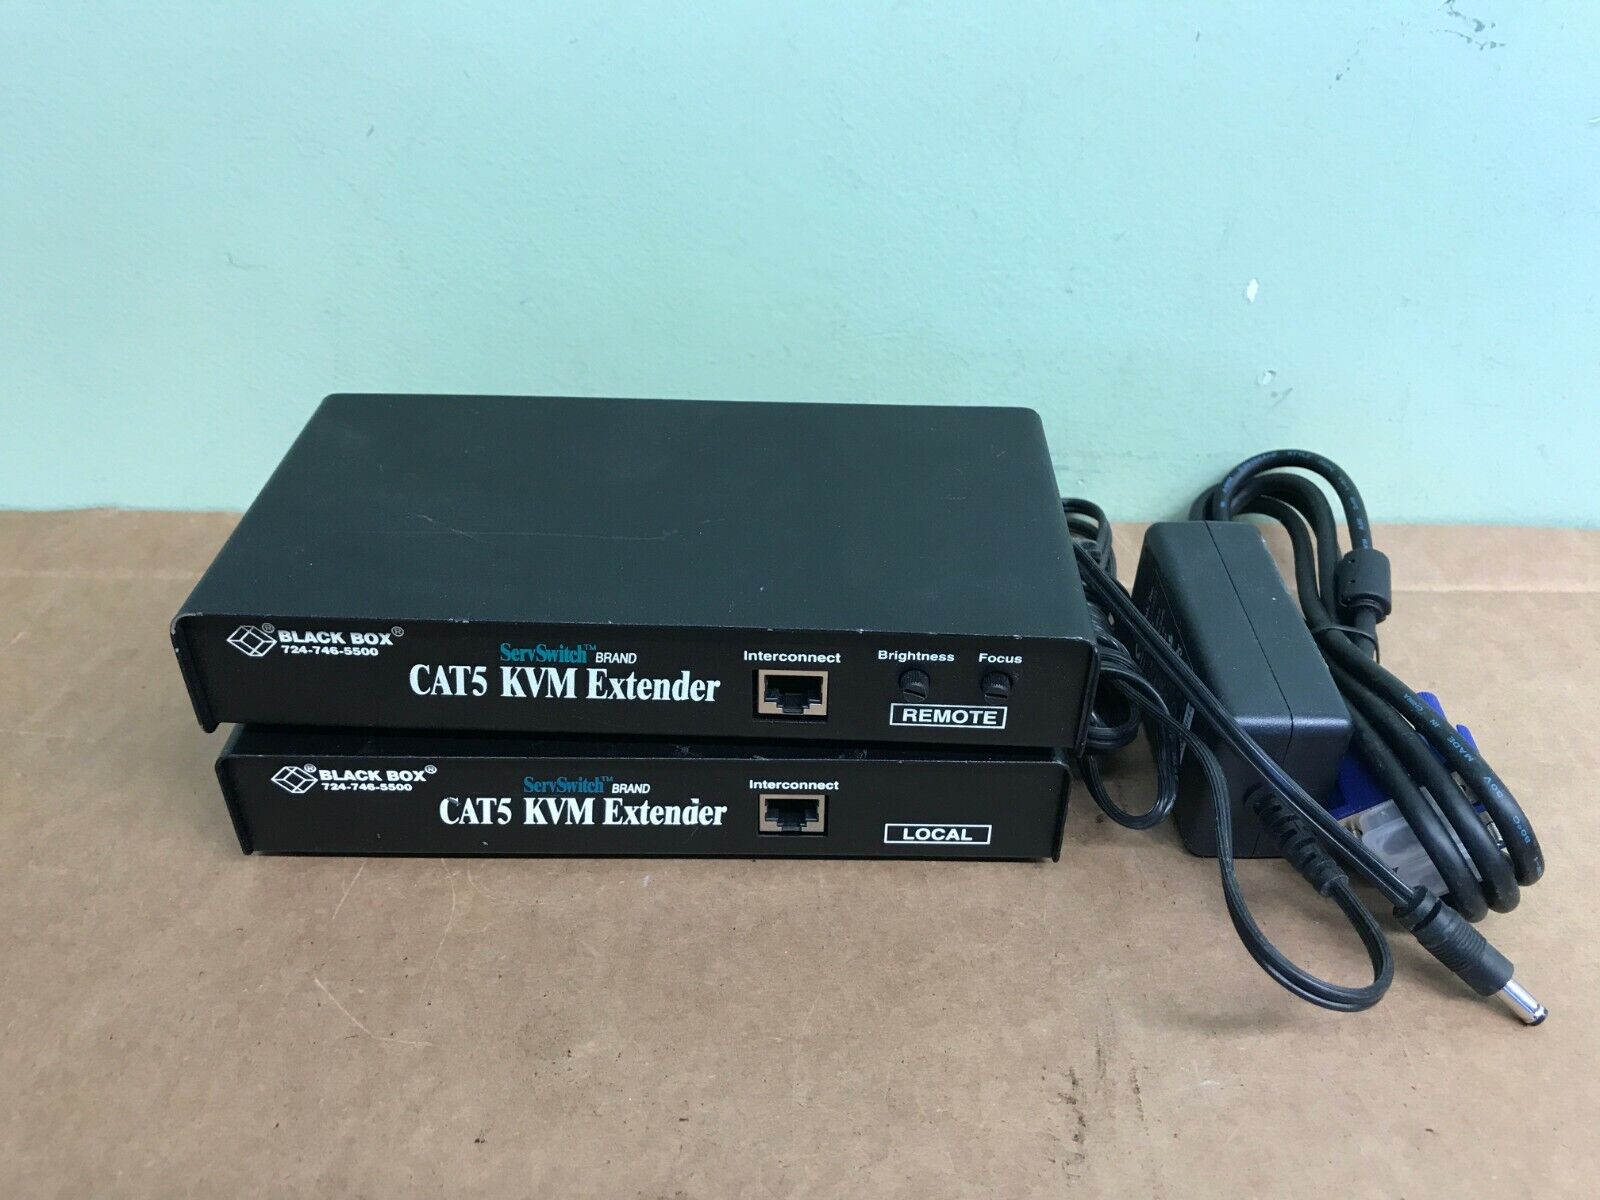 Black Box ServSwitch Cat5 KVM Extender Remote and Local , ACU1009A